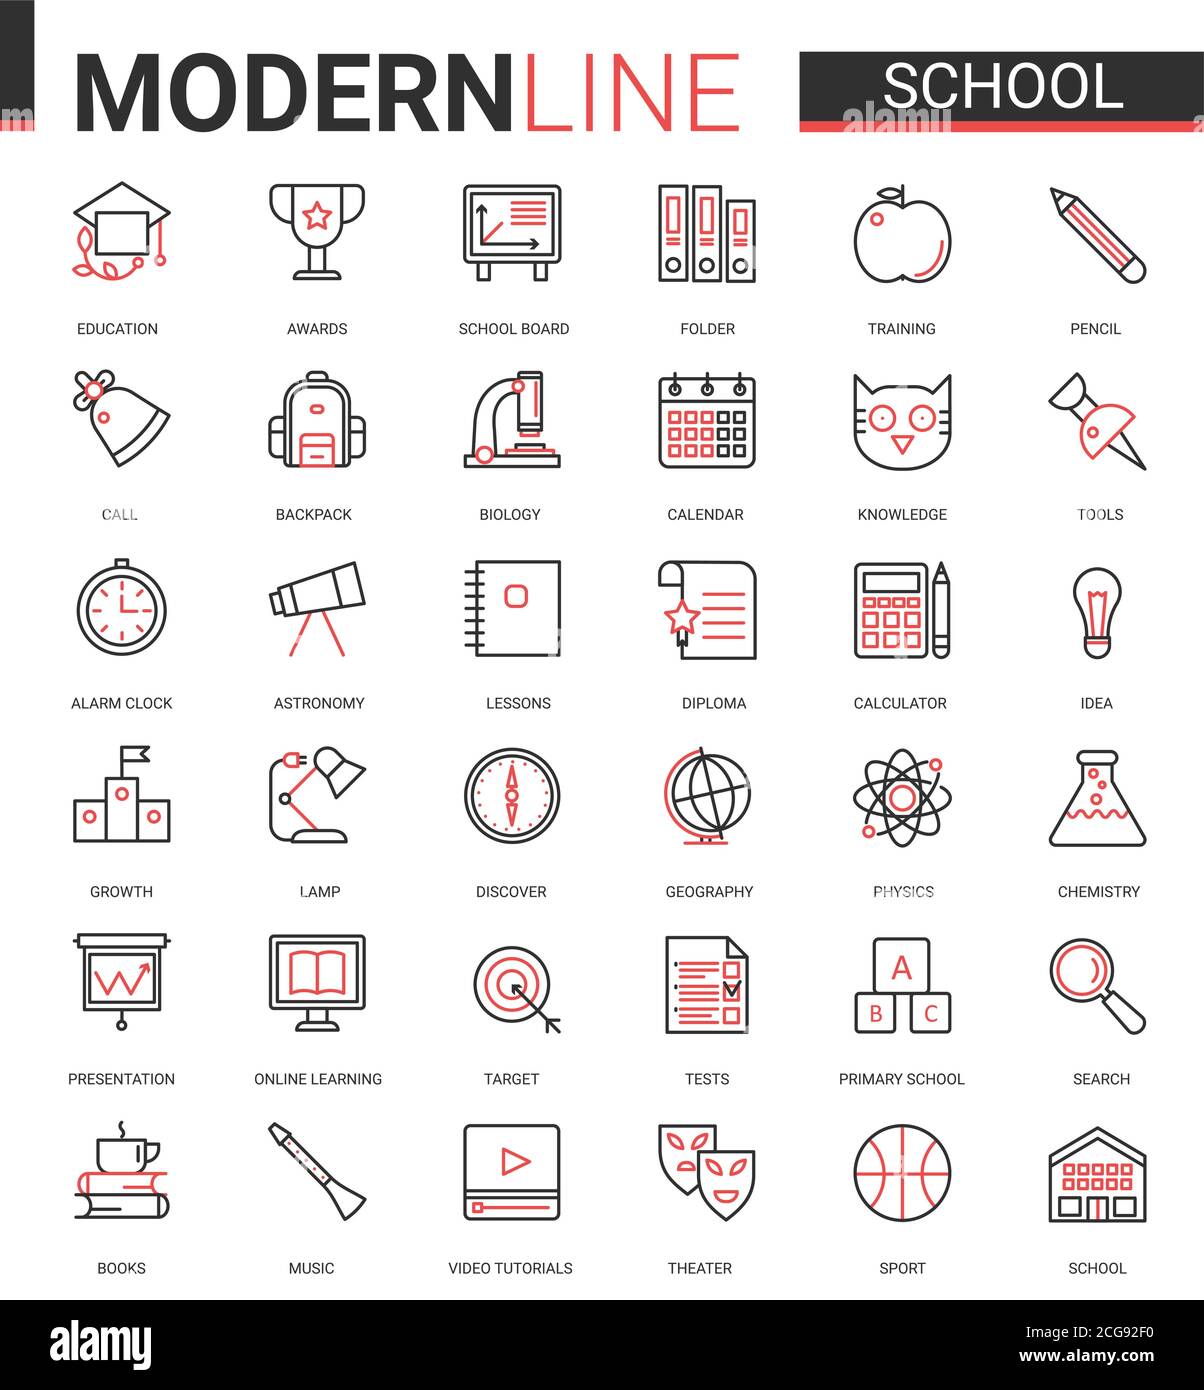 School education thin red black line icon vector illustration set with outline schooling ui mobile app collection of educational items for students and school subjects, editable stroke study symbols Stock Vector